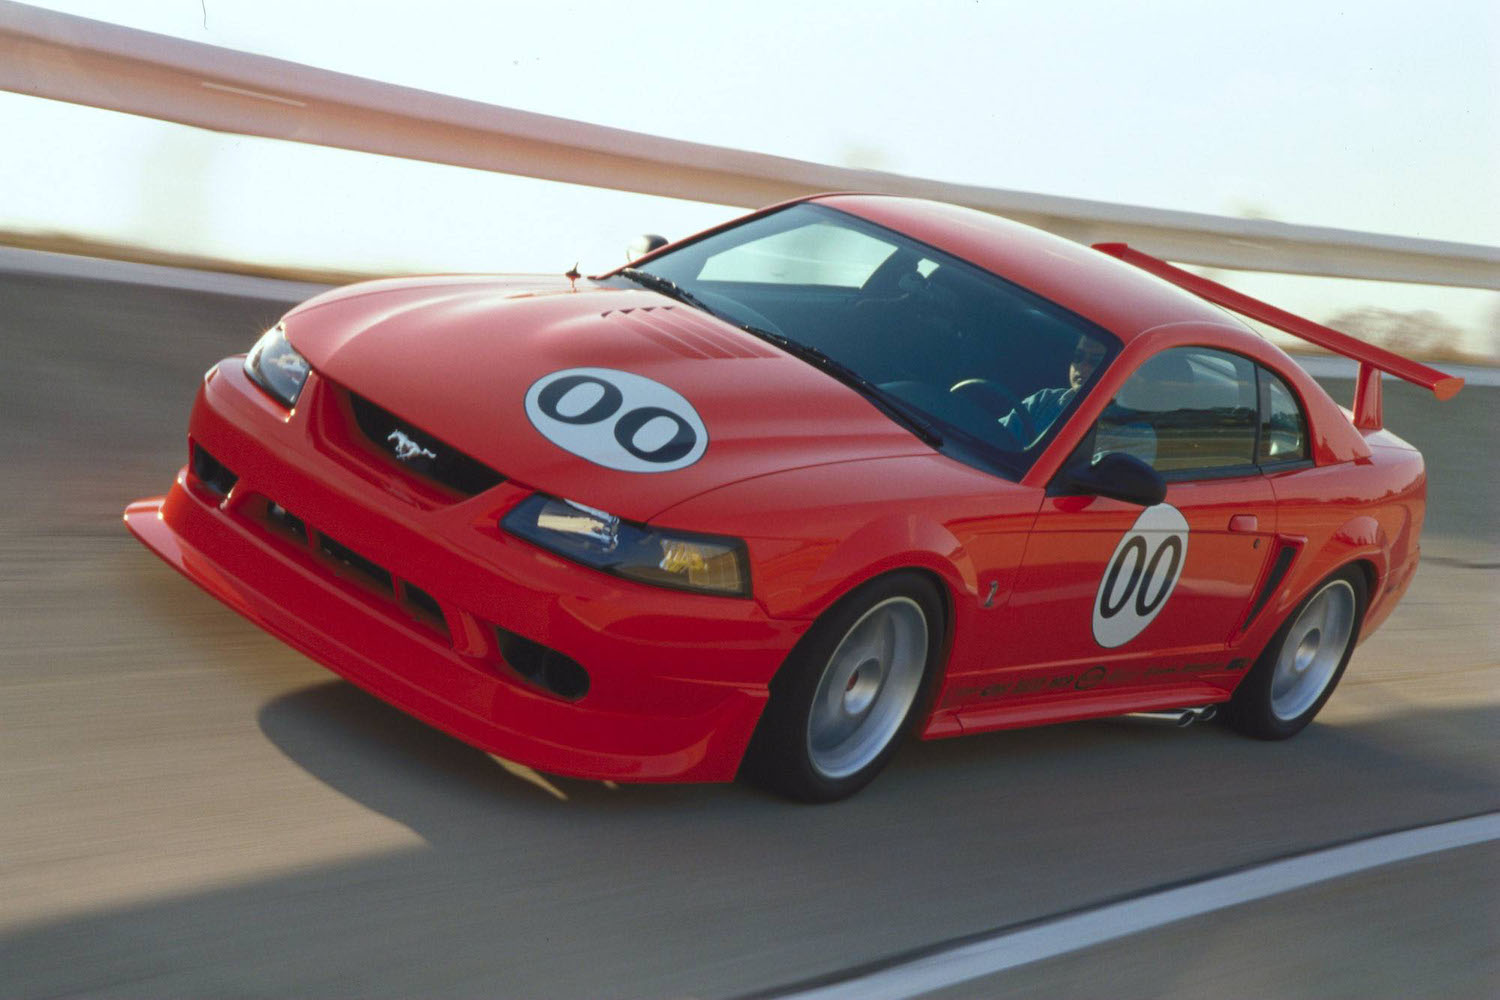 2000 Ford Mustang Cobra Concept